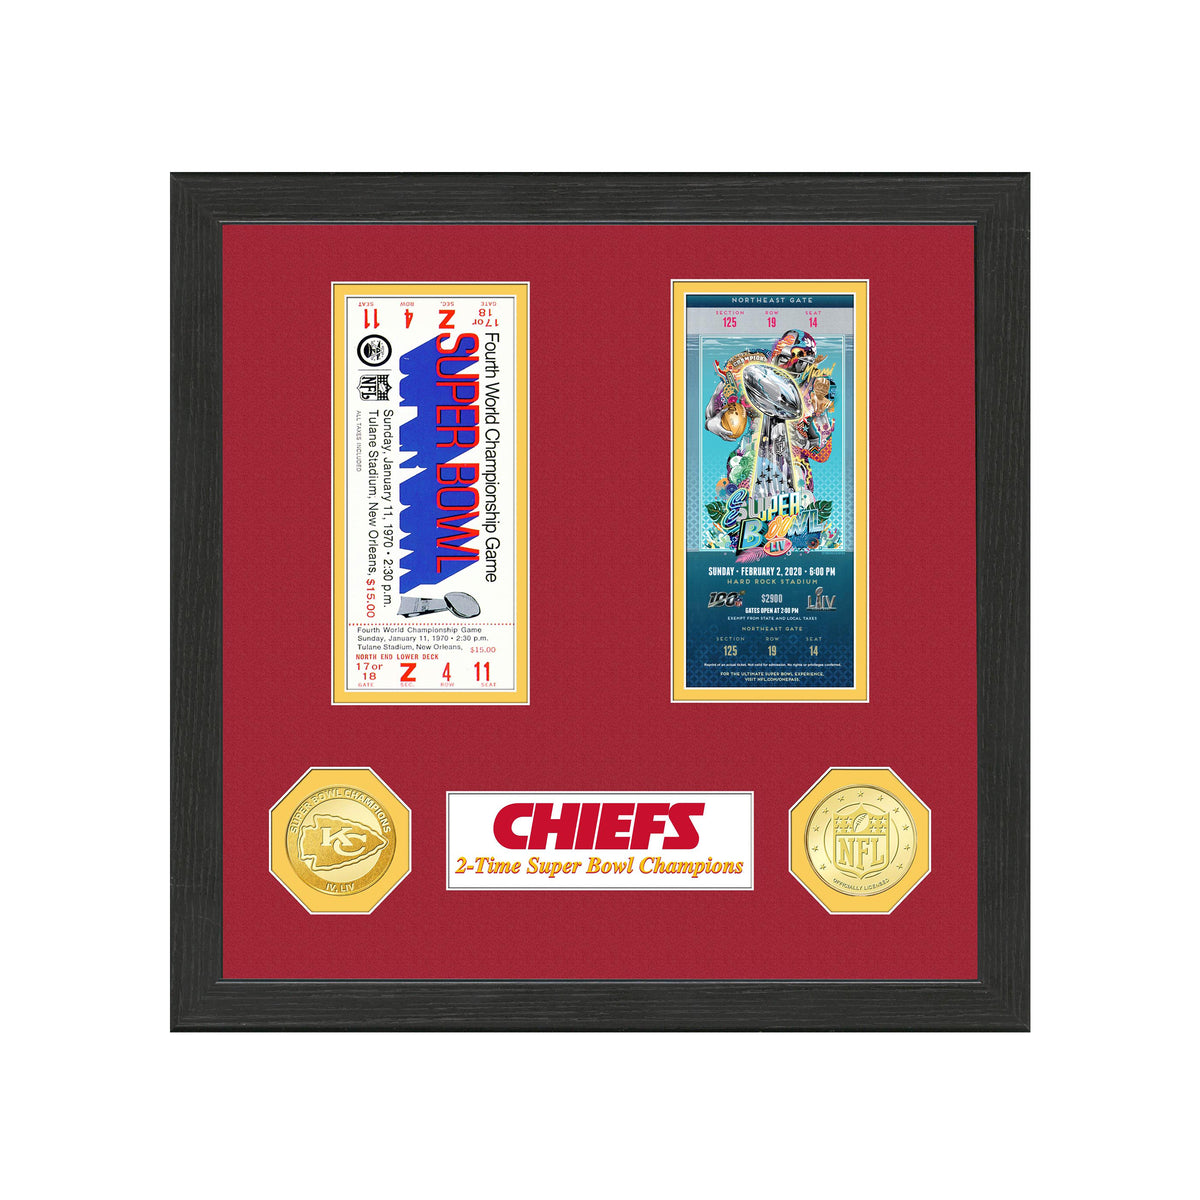 Kansas City Chiefs Super Bowl Champions Ticket Collections Frame